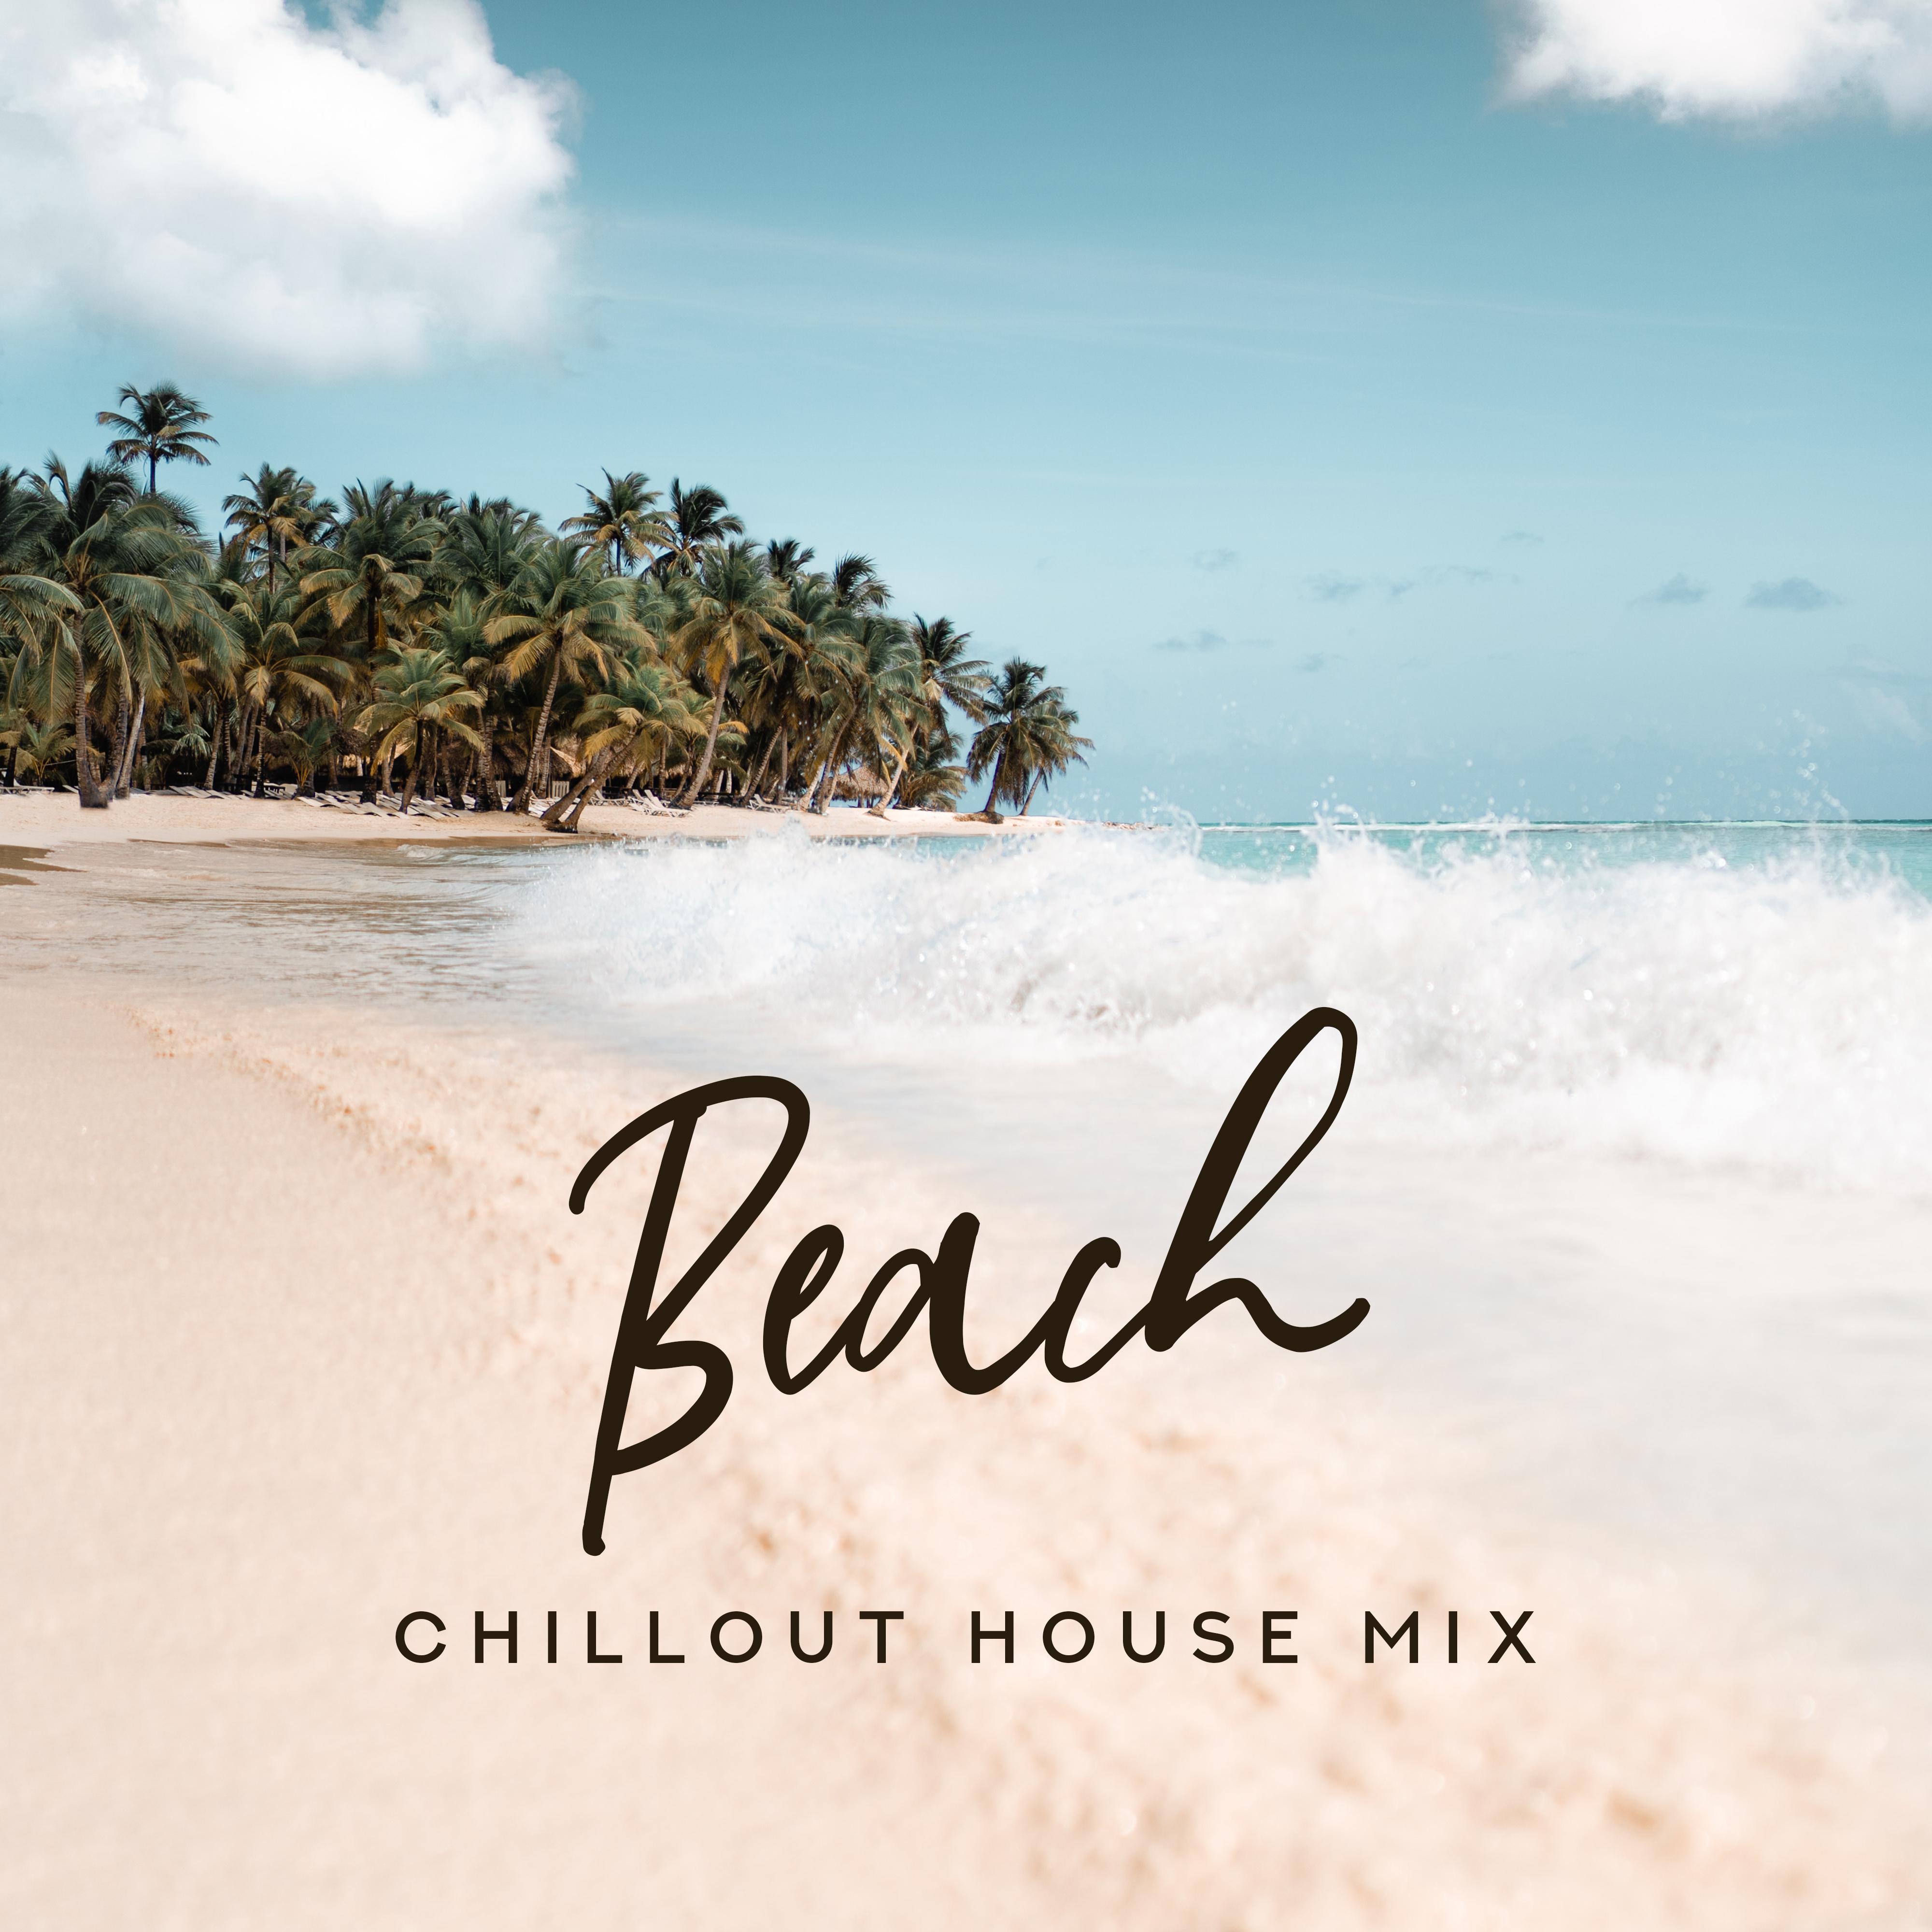 Beach Chillout House Mix: Selection of Most Relaxing Chill Out 2019 Music, Fantastic Vacation Vibes for Total Calming Down & Full Rest, Slow Beats & Beautiful Ambient Melodies